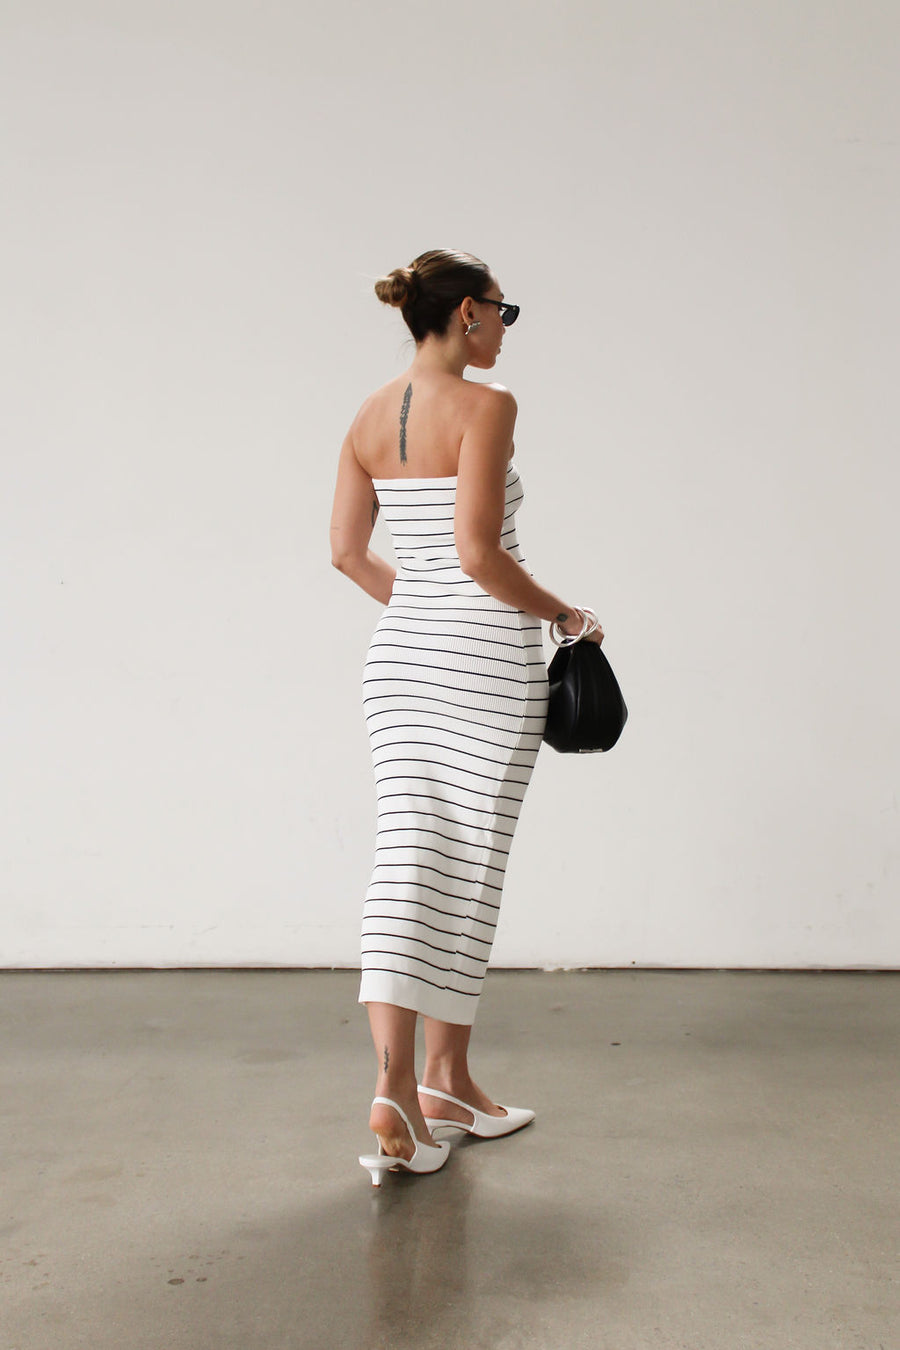 Striped ribbed knit maxi dress. Strapless elastic neckline. Front knot detail. Unlined.